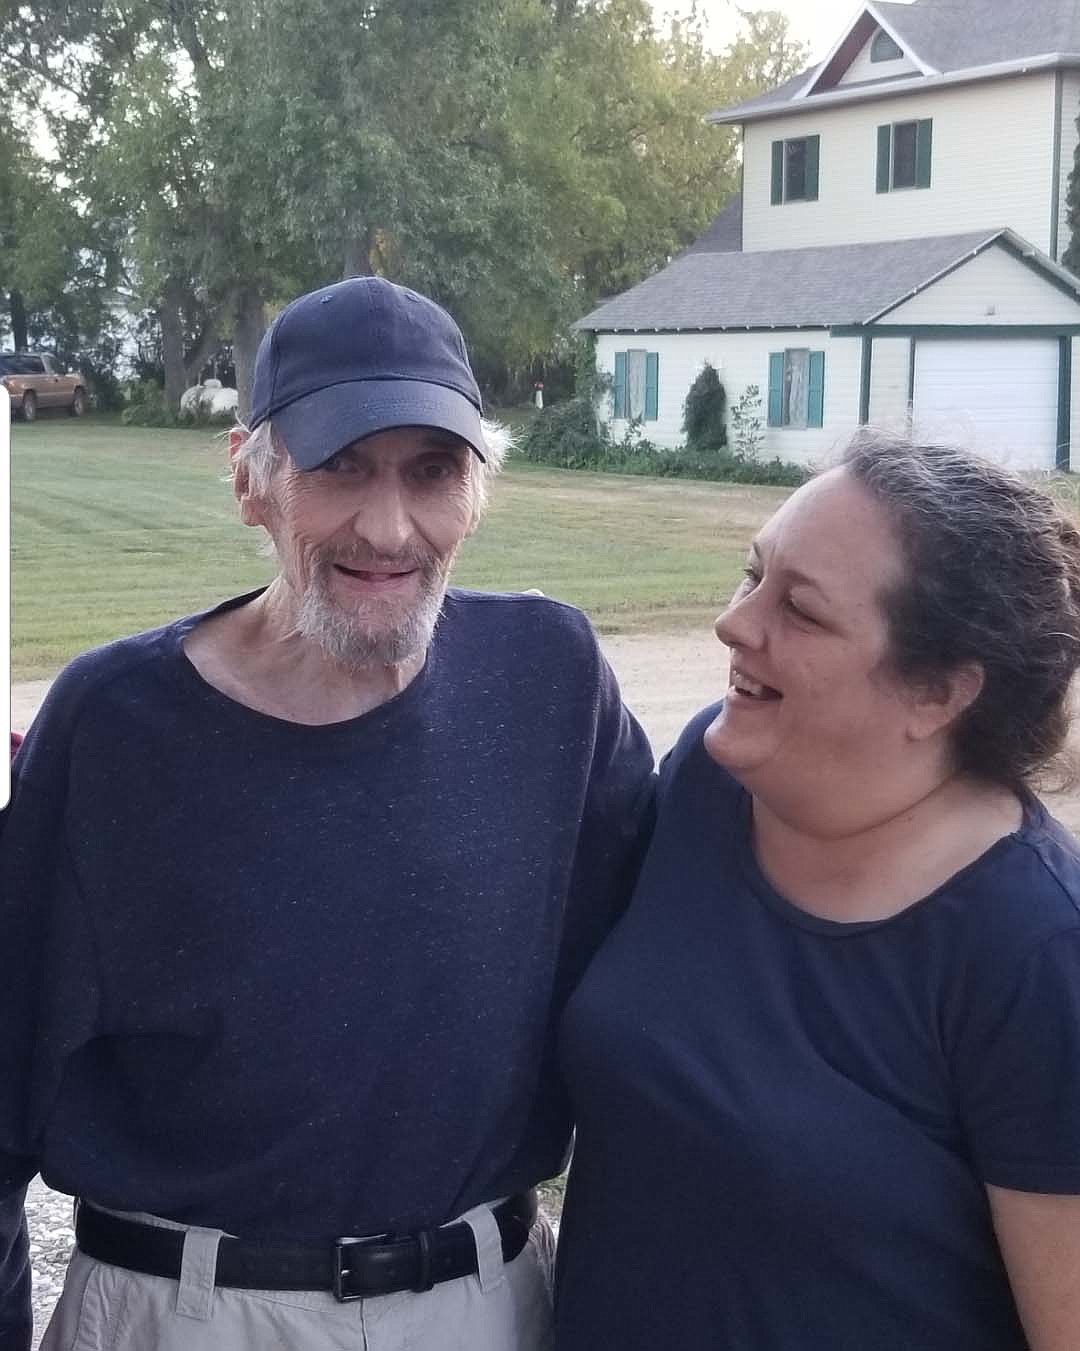 Serenity Frantzen is pictured with her father, Robert Marr, in September of 2020. Marr had recently been removed from the Whitefish Care and Rehabilitation Center following the facility's COVID-19 outbreak. (Photo provided by Serenity Frantzen)